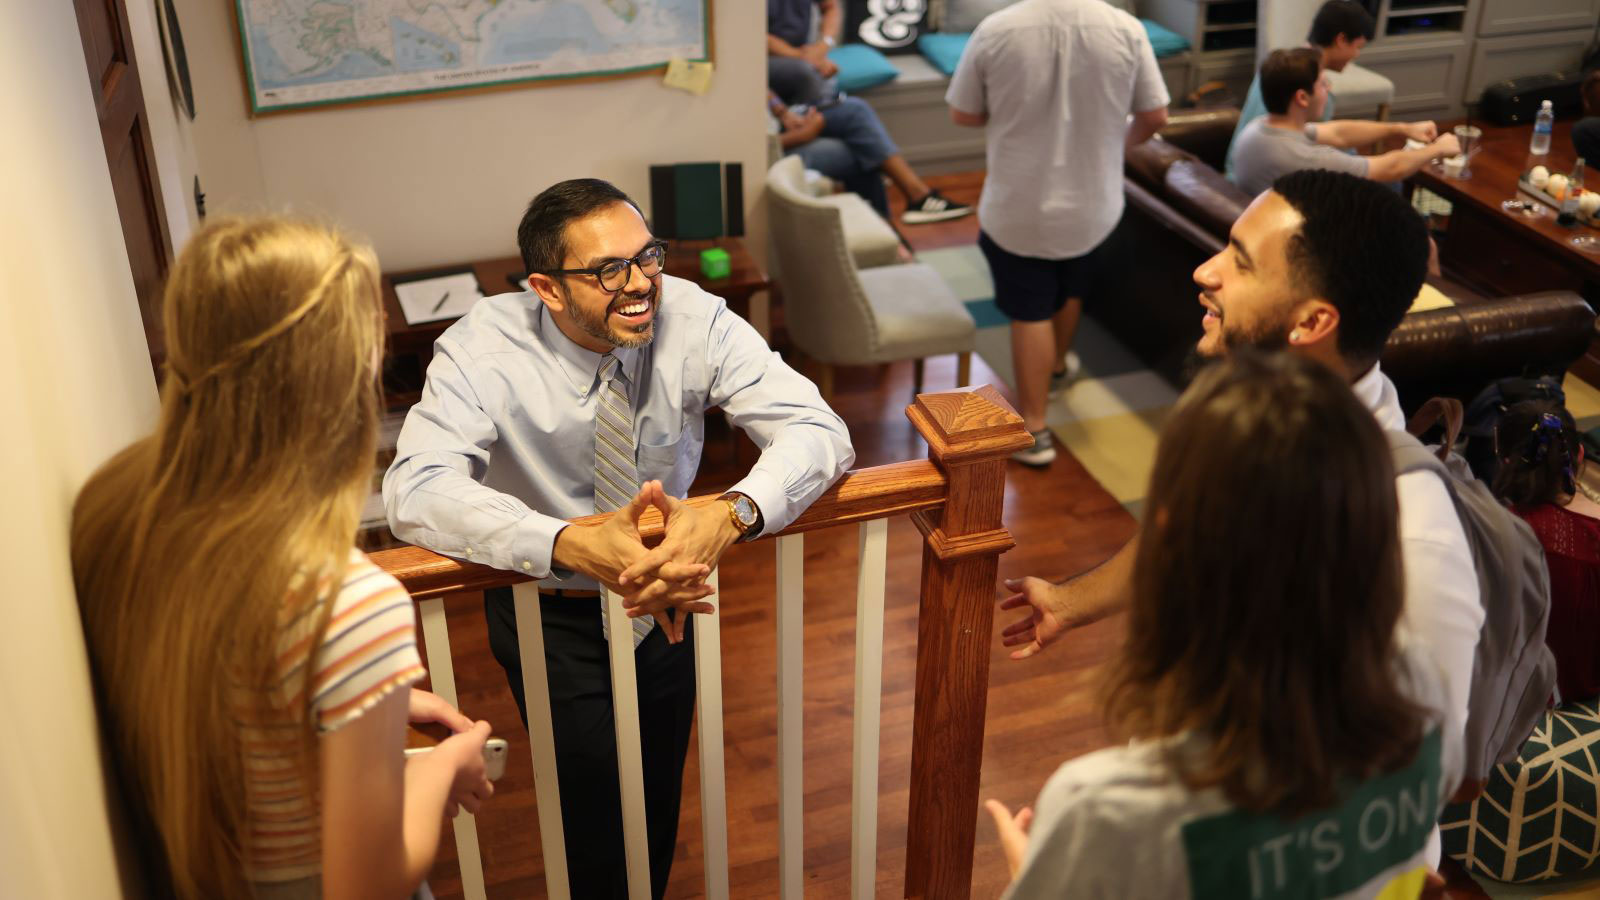 Rishi Sriram, Ph.D., is Faculty Steward at Brooks College shown here speaking with students.